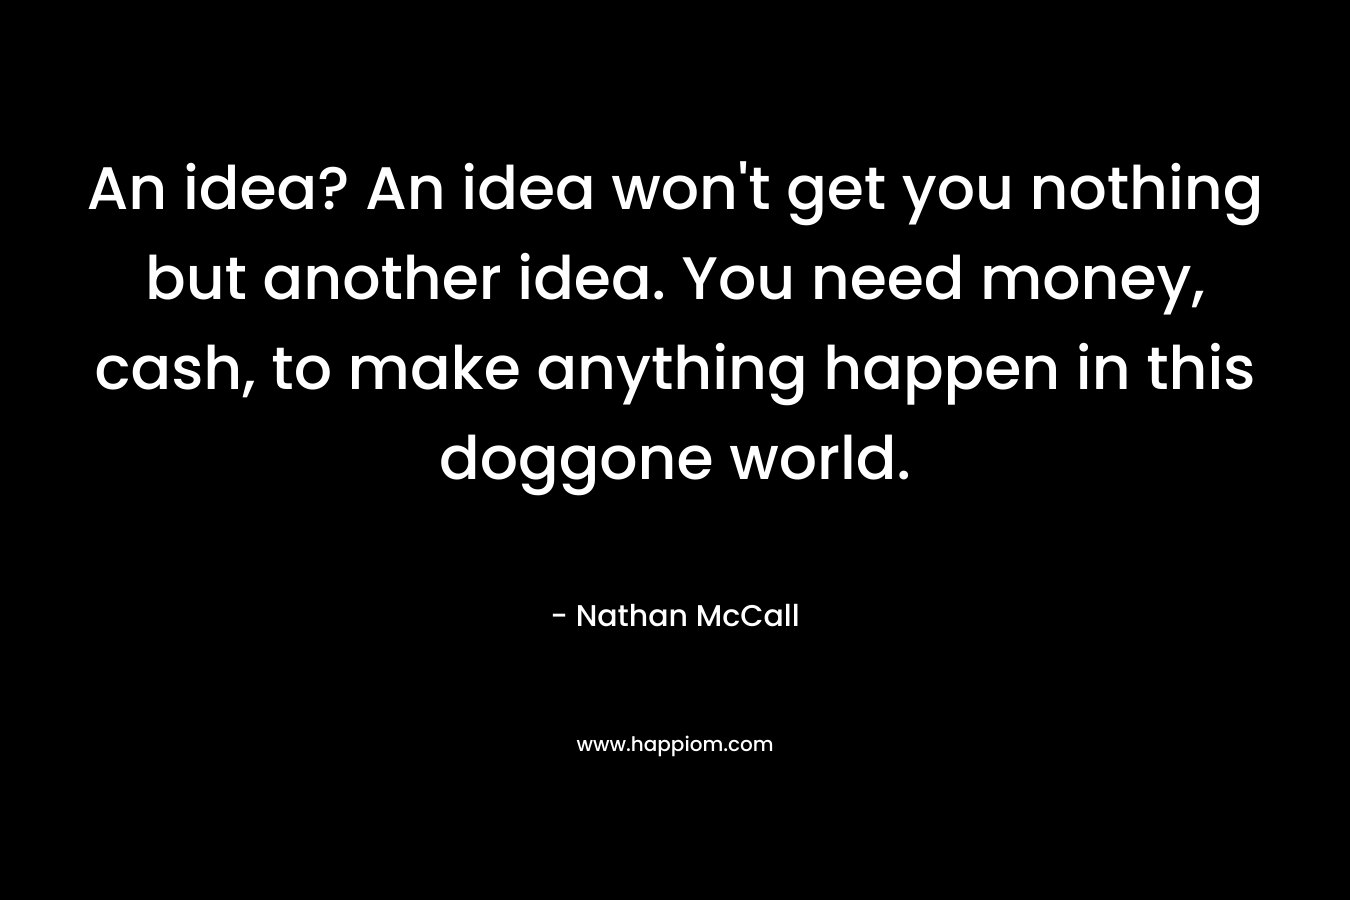 An idea? An idea won't get you nothing but another idea. You need money, cash, to make anything happen in this doggone world.